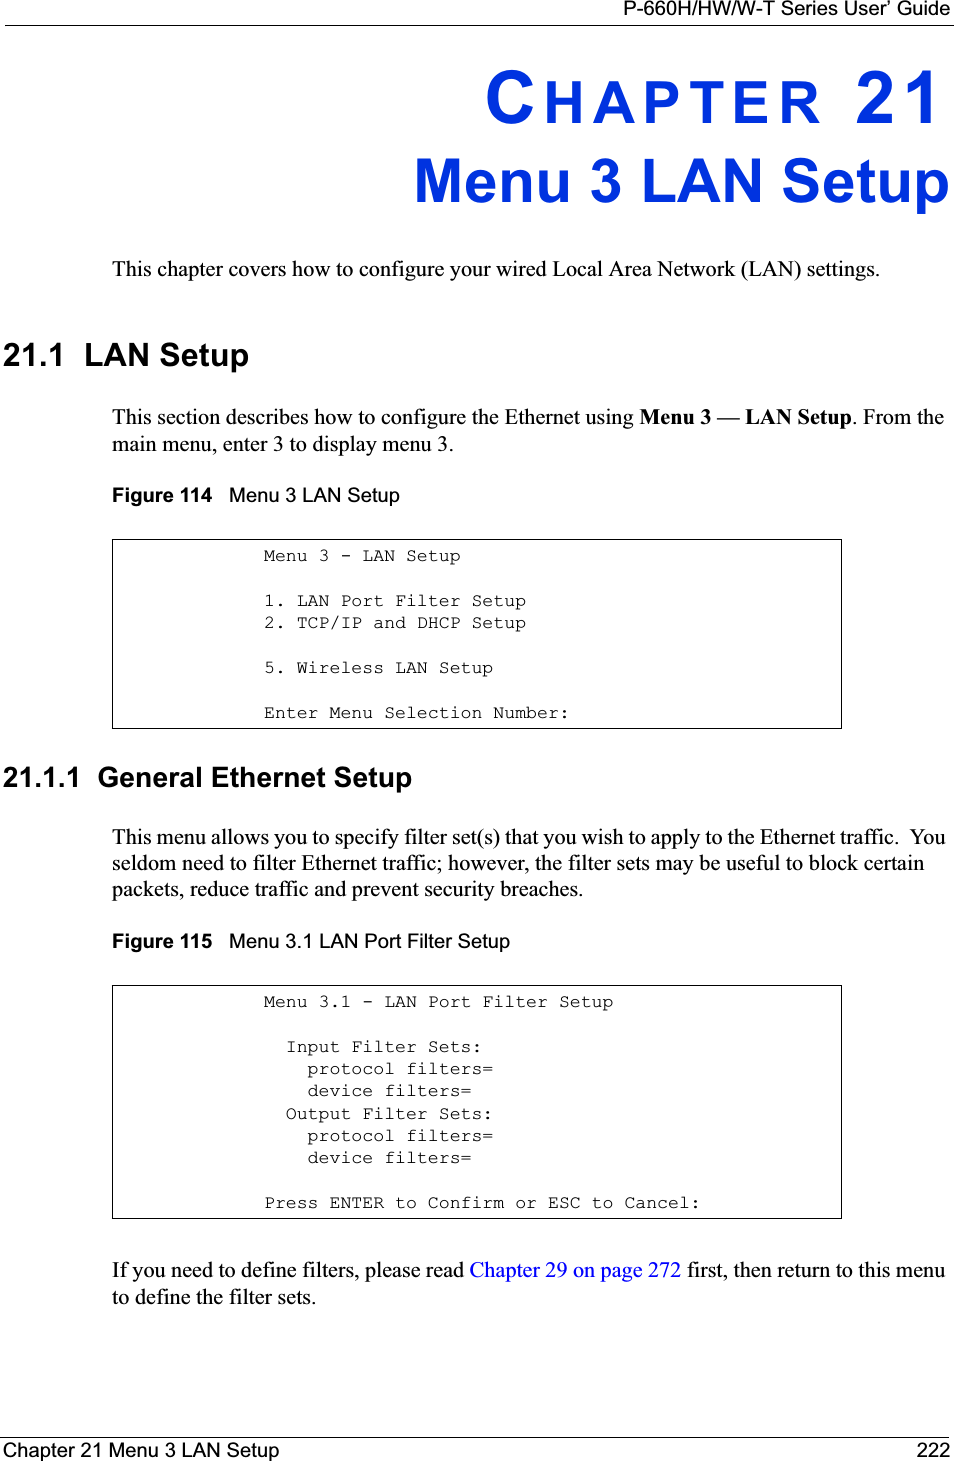 P-660H/HW/W-T Series User’ GuideChapter 21 Menu 3 LAN Setup 222CHAPTER 21Menu 3 LAN SetupThis chapter covers how to configure your wired Local Area Network (LAN) settings.21.1  LAN SetupThis section describes how to configure the Ethernet using Menu 3 — LAN Setup. From the main menu, enter 3 to display menu 3.Figure 114   Menu 3 LAN Setup 21.1.1  General Ethernet SetupThis menu allows you to specify filter set(s) that you wish to apply to the Ethernet traffic.  You seldom need to filter Ethernet traffic; however, the filter sets may be useful to block certain packets, reduce traffic and prevent security breaches.Figure 115   Menu 3.1 LAN Port Filter SetupIf you need to define filters, please read Chapter 29 on page 272 first, then return to this menu to define the filter sets.Menu 3 - LAN Setup1. LAN Port Filter Setup2. TCP/IP and DHCP Setup5. Wireless LAN SetupEnter Menu Selection Number:Menu 3.1 - LAN Port Filter Setup  Input Filter Sets:    protocol filters=    device filters=  Output Filter Sets:    protocol filters=    device filters=Press ENTER to Confirm or ESC to Cancel: